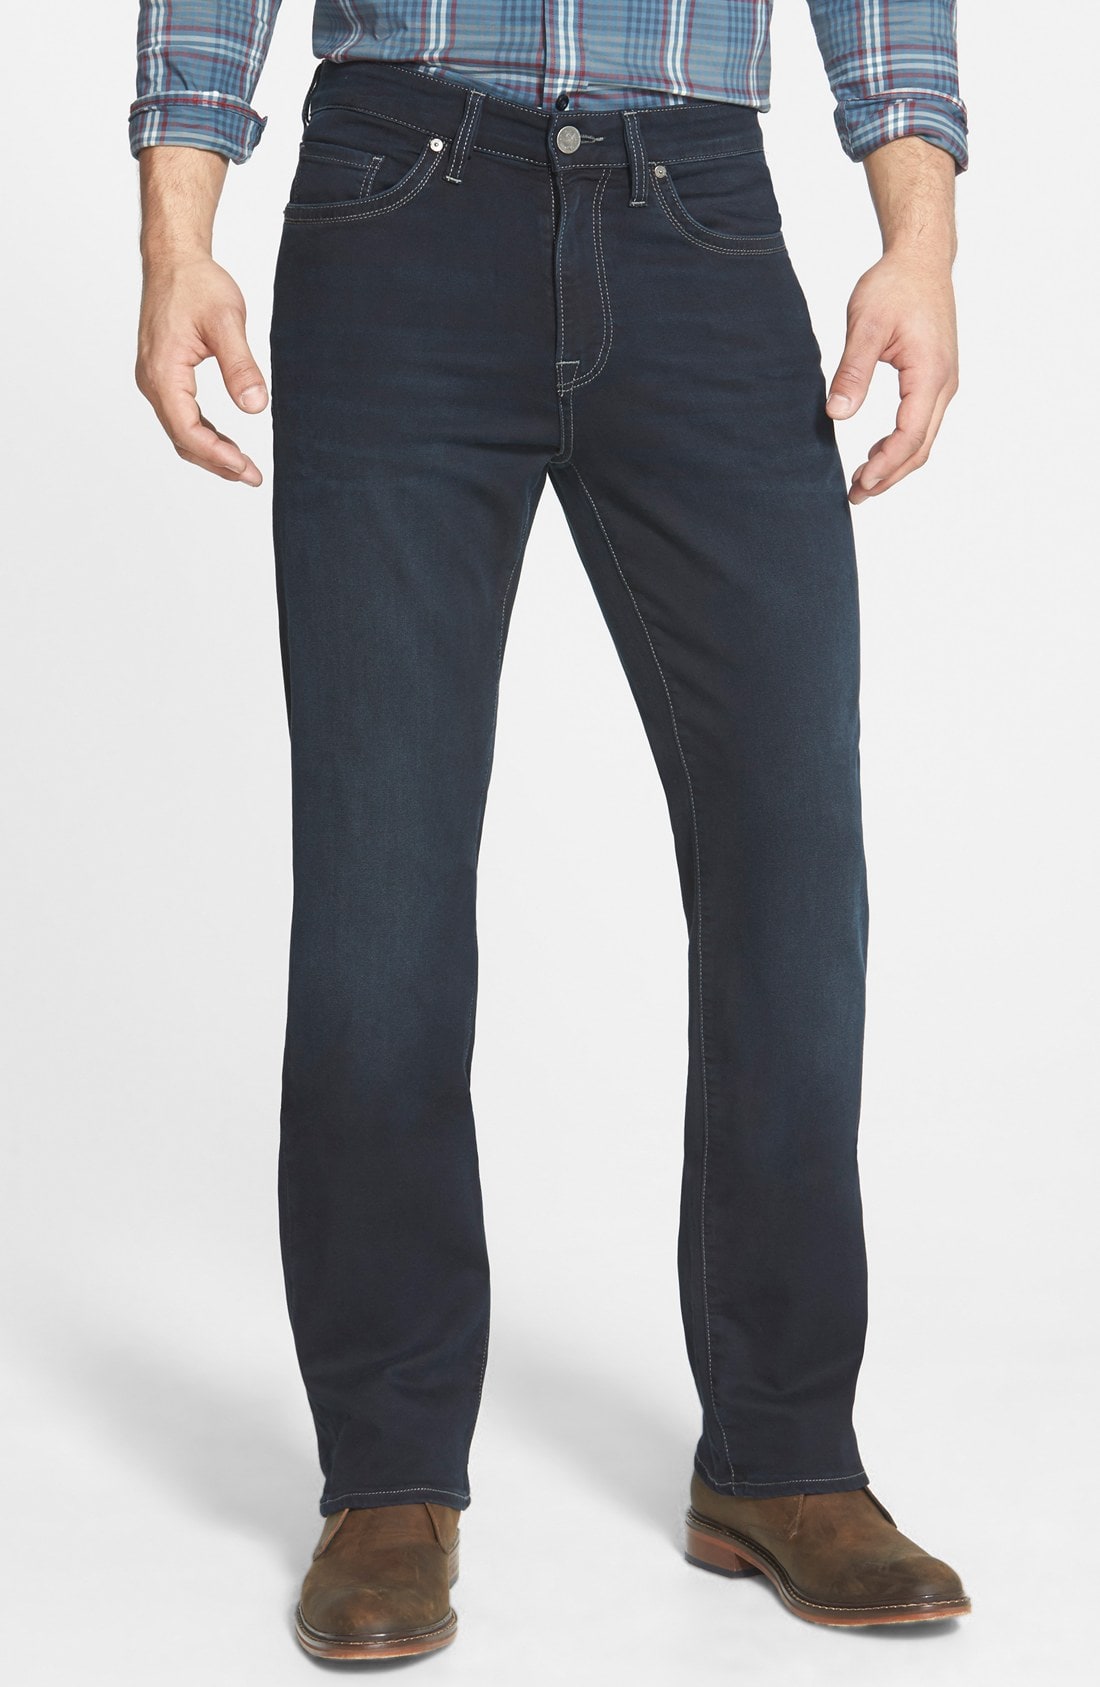 34 Heritage 'Charisma' Classic Relaxed Fit Jeans (Midnight Austin) (Online Only)